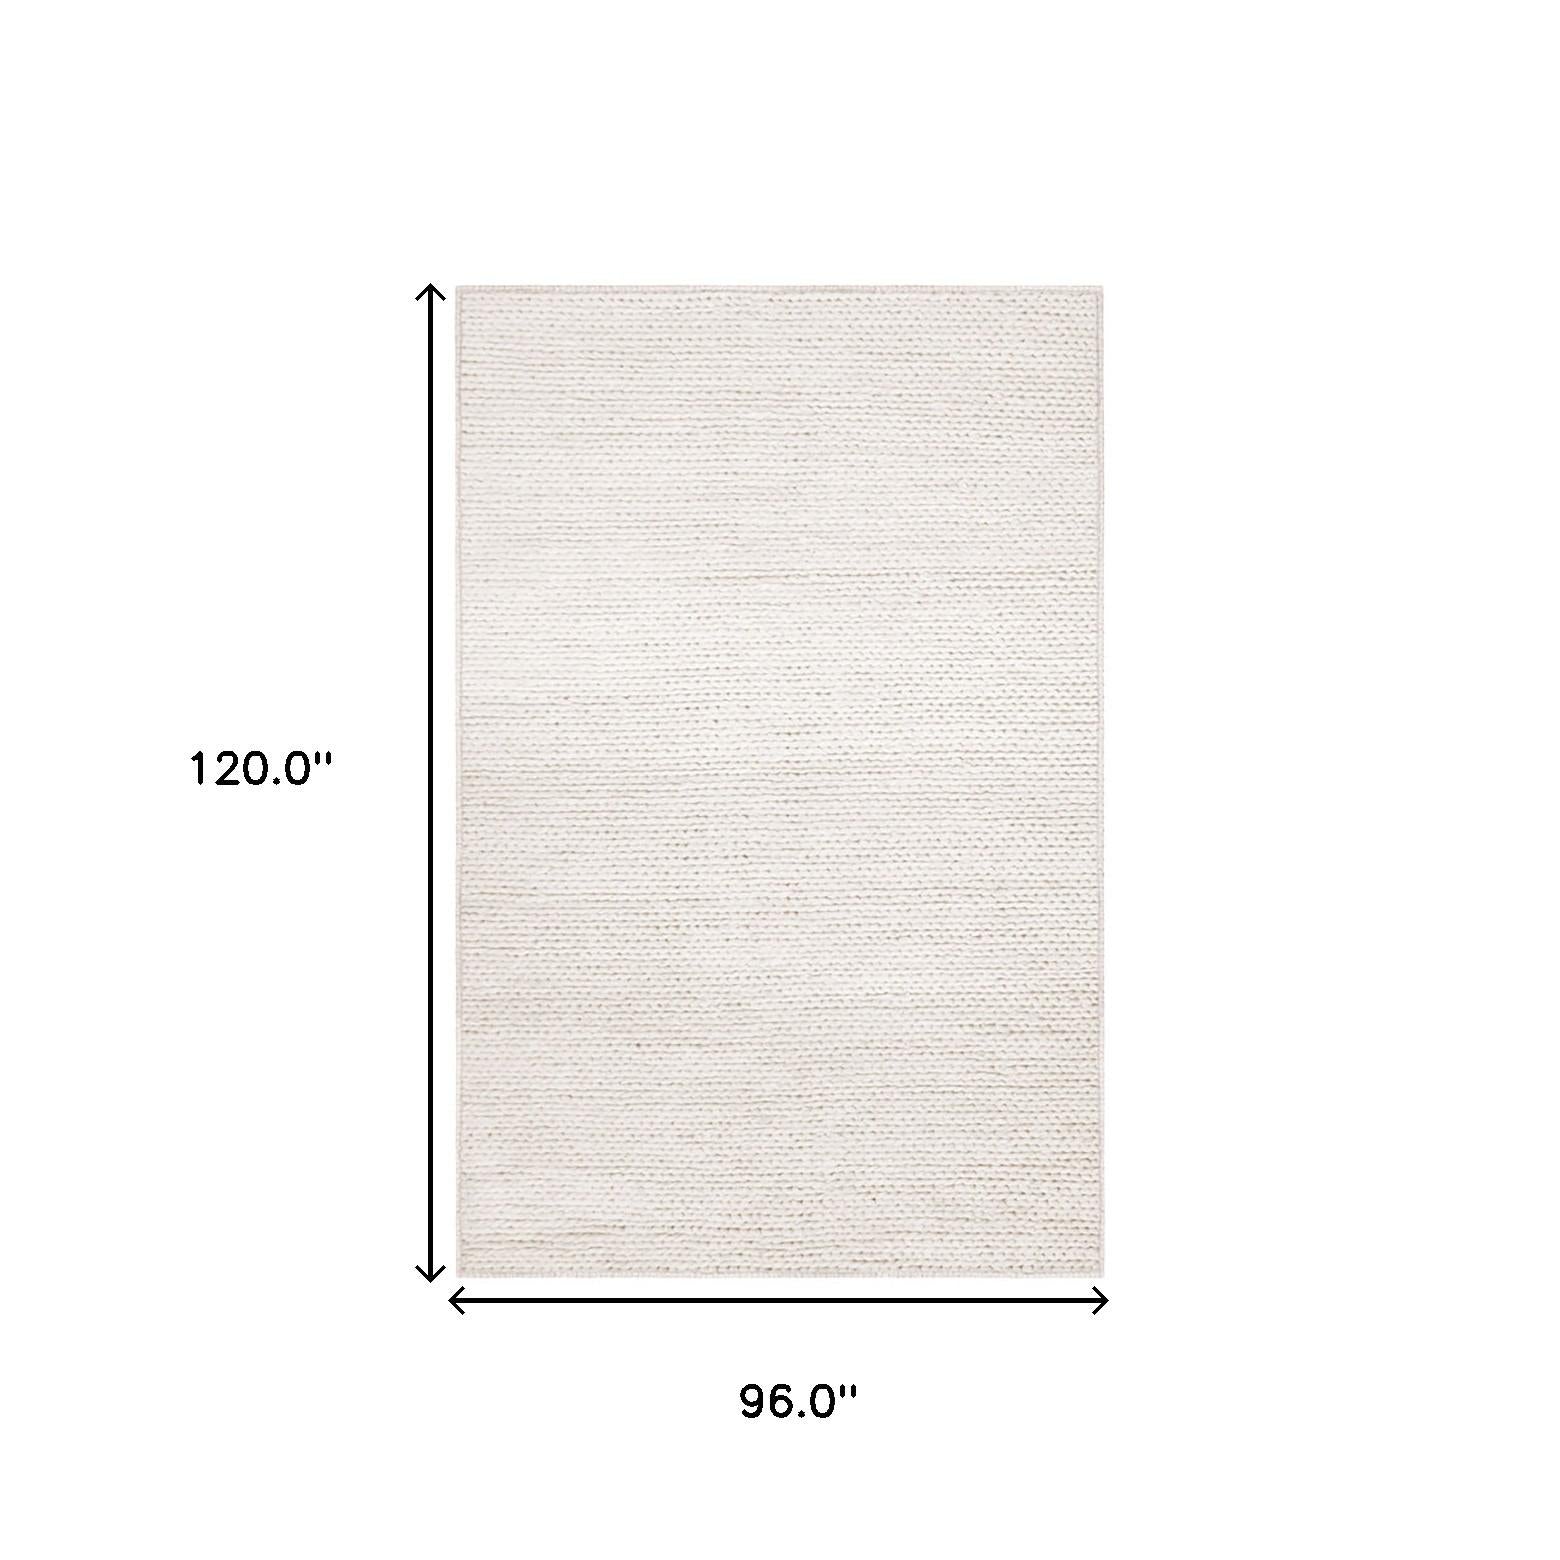 8' X 10' Off White Wool Handmade Stain Resistant Area Rug